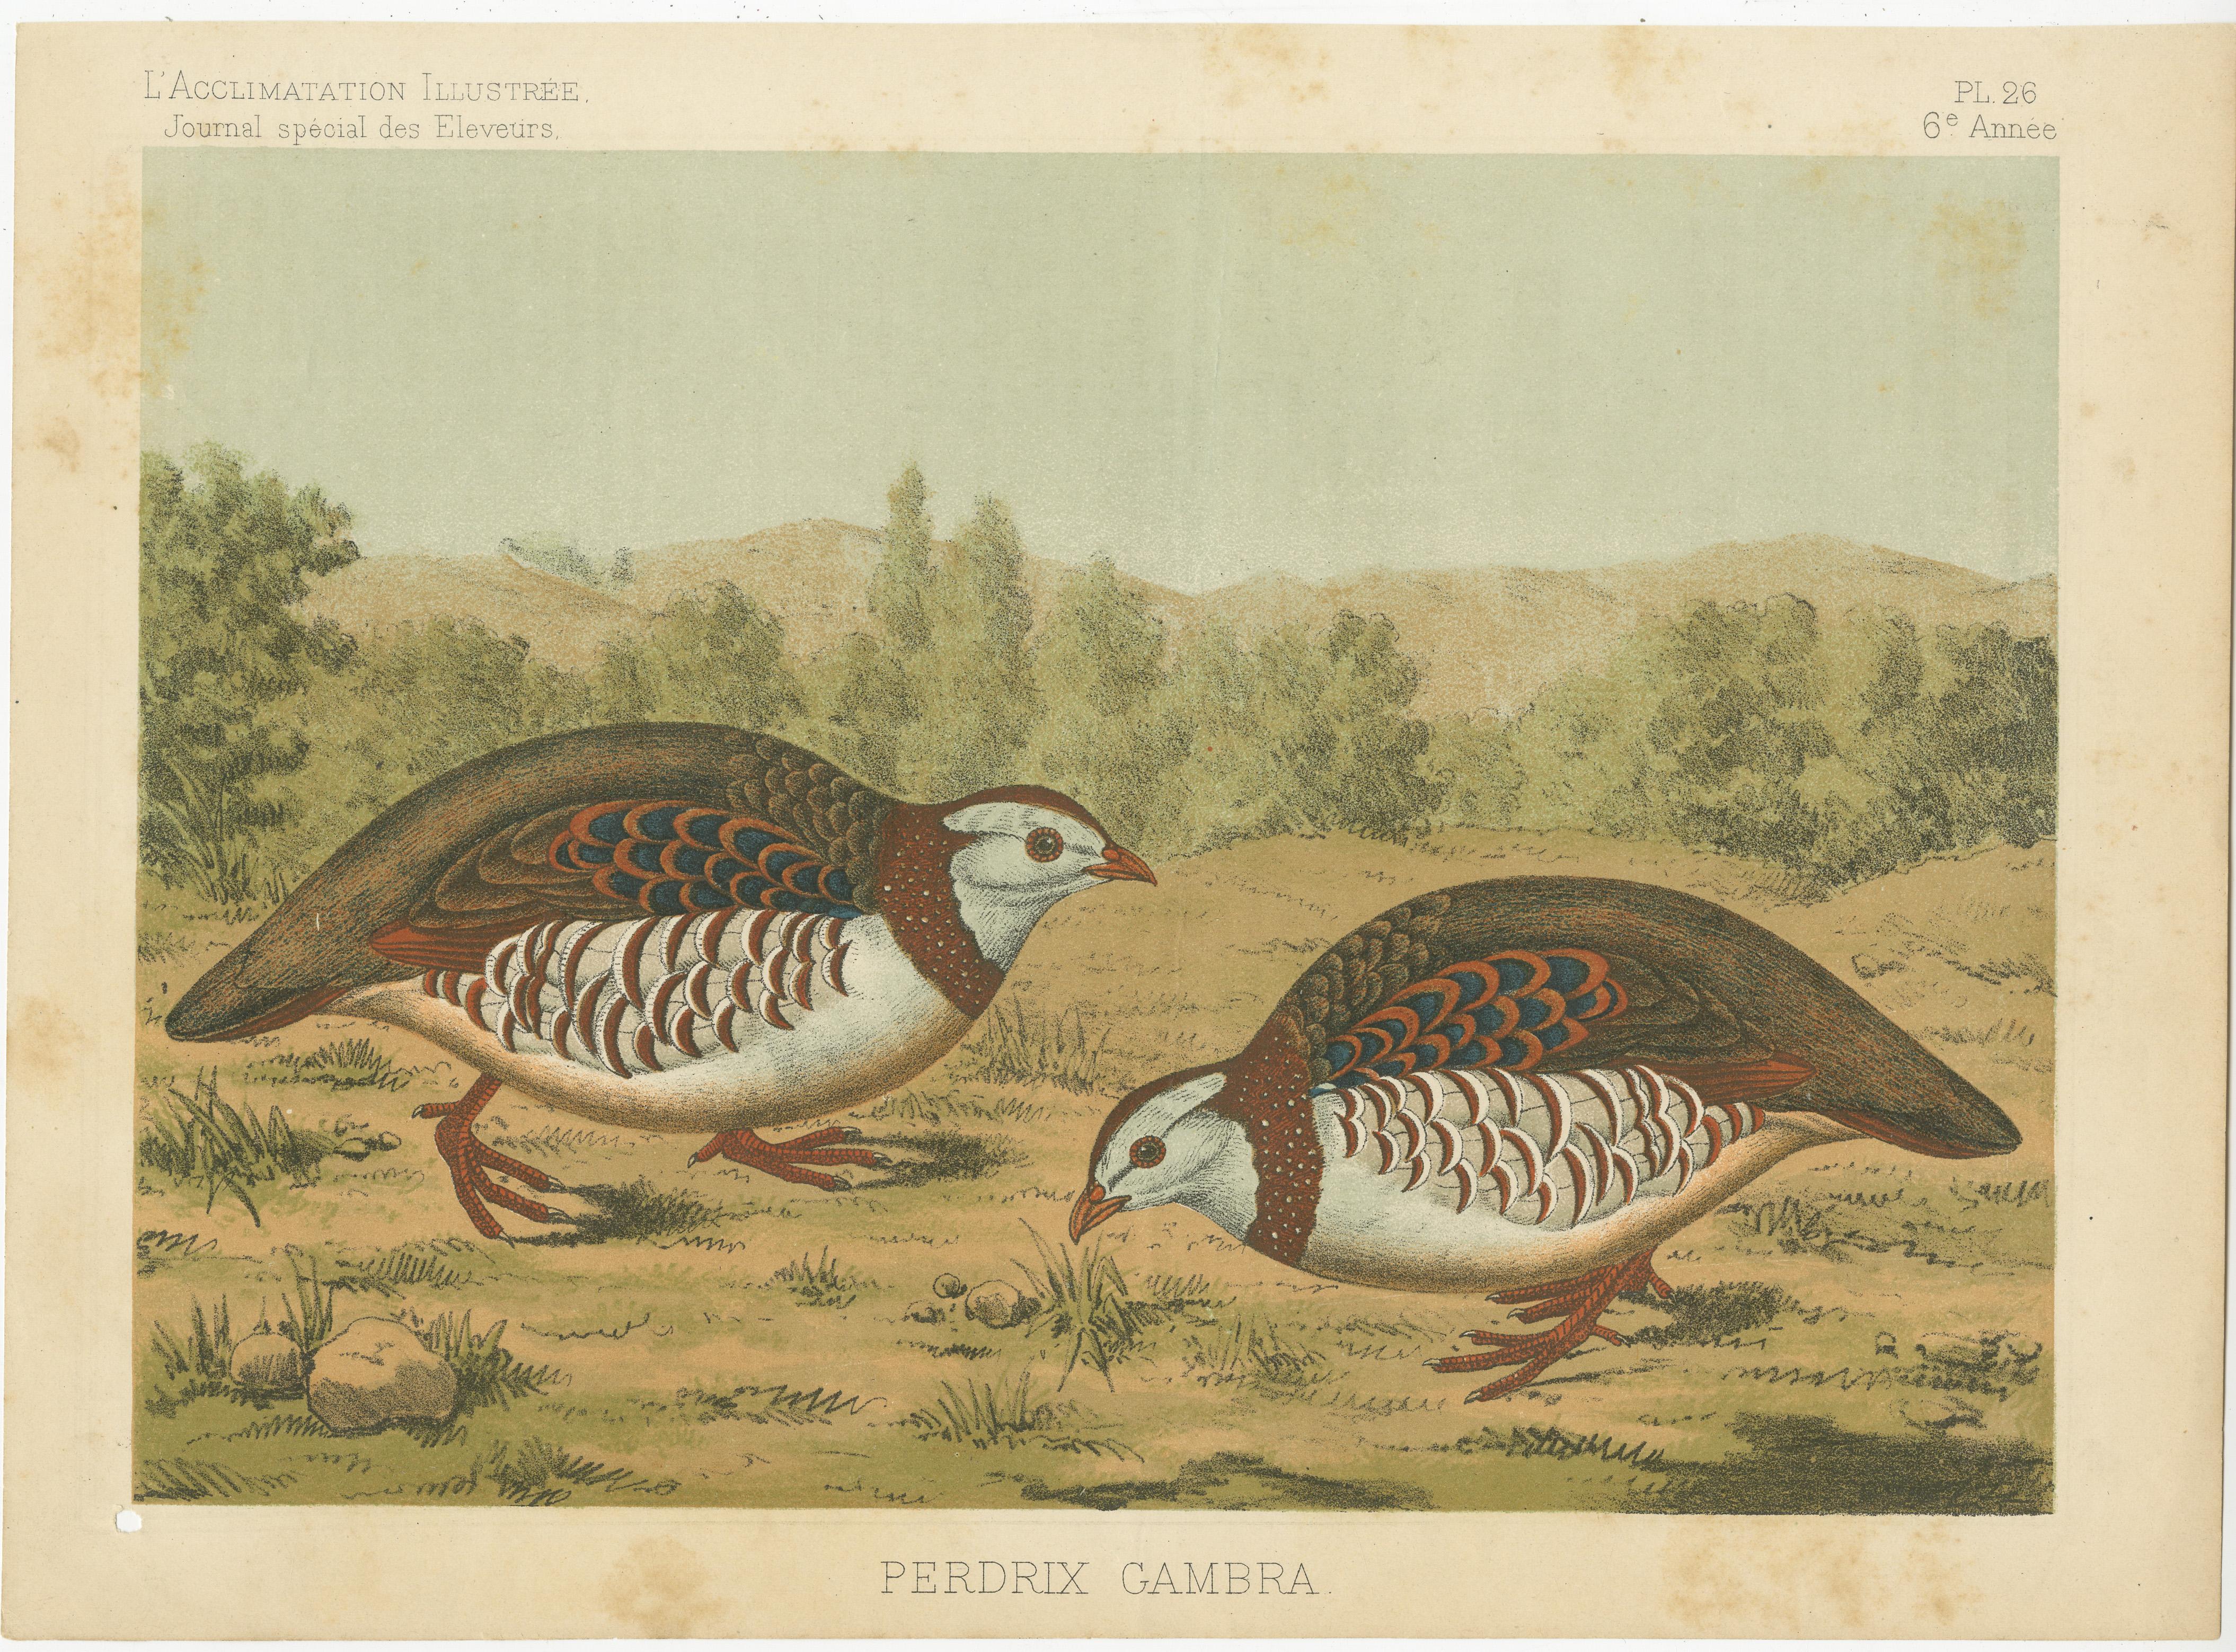 Antique print titled 'Perdrix Gambra'. Original old bird print of a Barbary partridge. The Barbary partridge (Alectoris barbara) is a gamebird in the pheasant family (Phasianidae) of the order Galliformes. This print originates from 'L'acclimatation